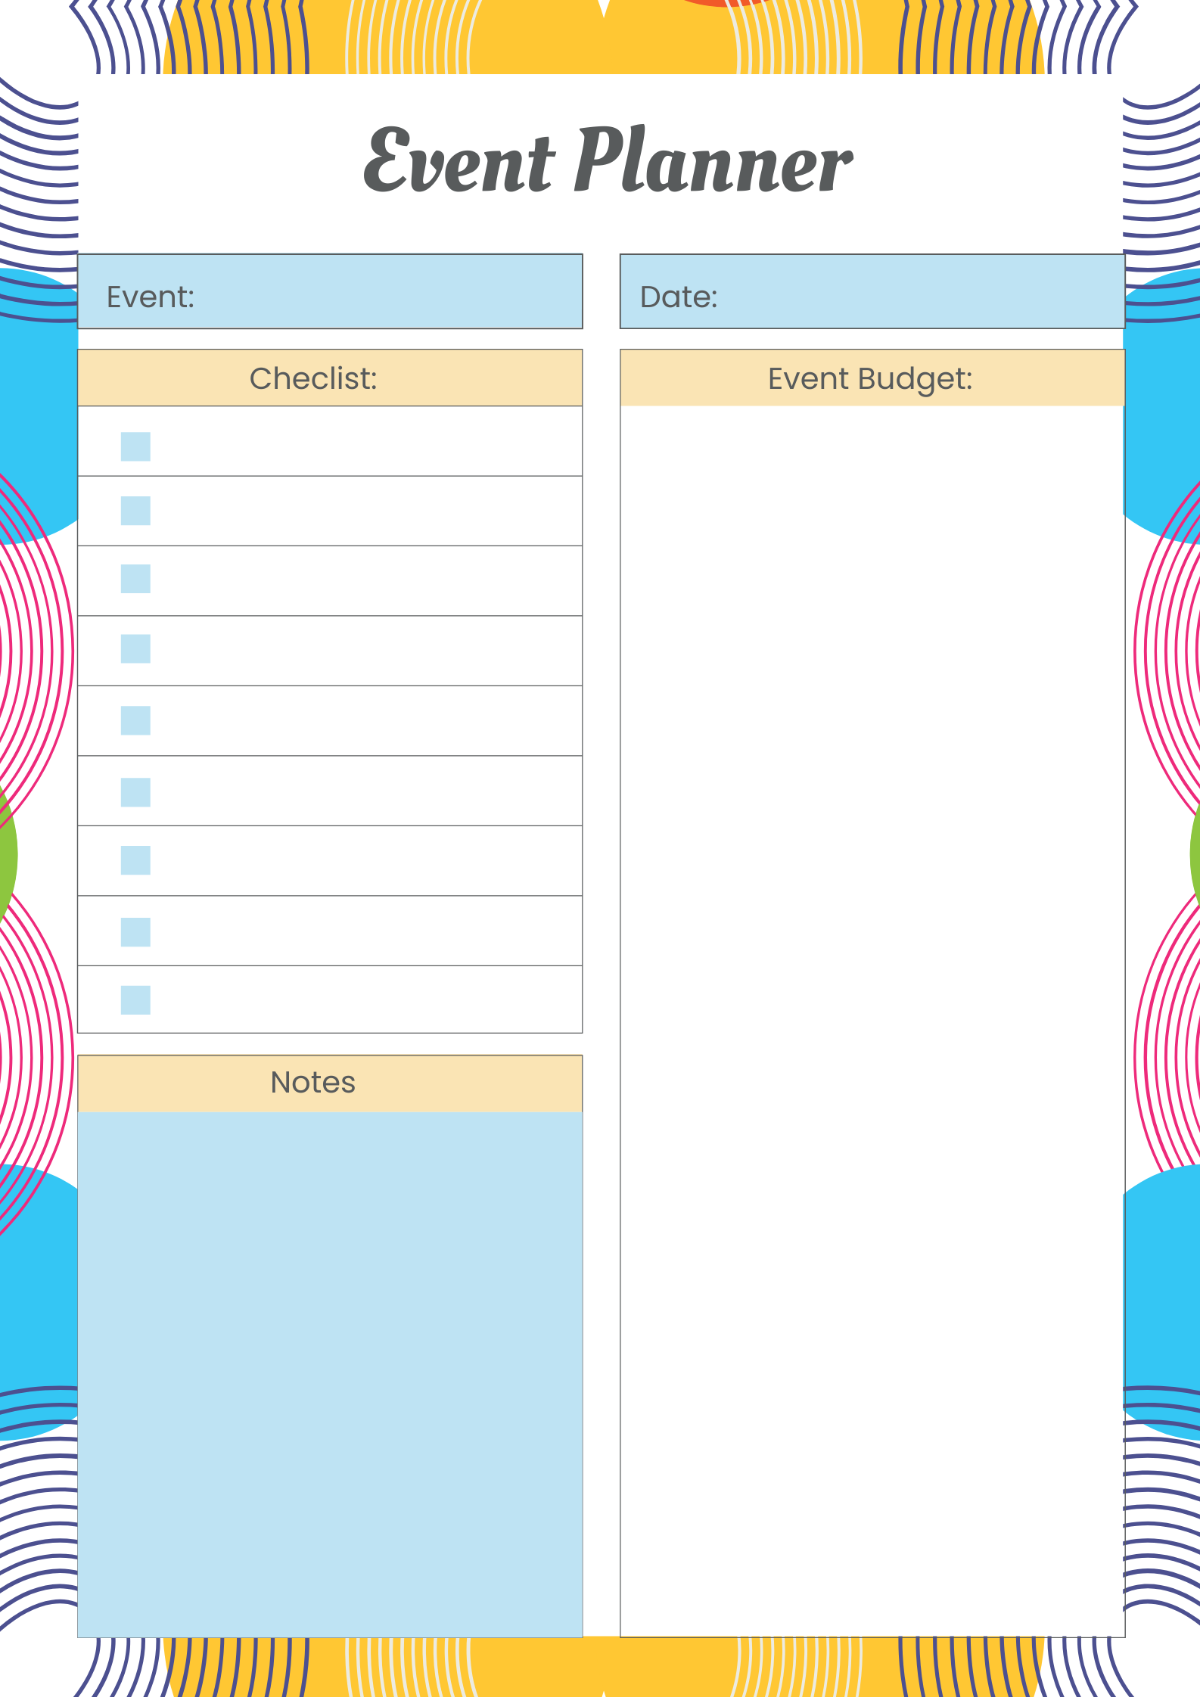 Sample Event Planner Template